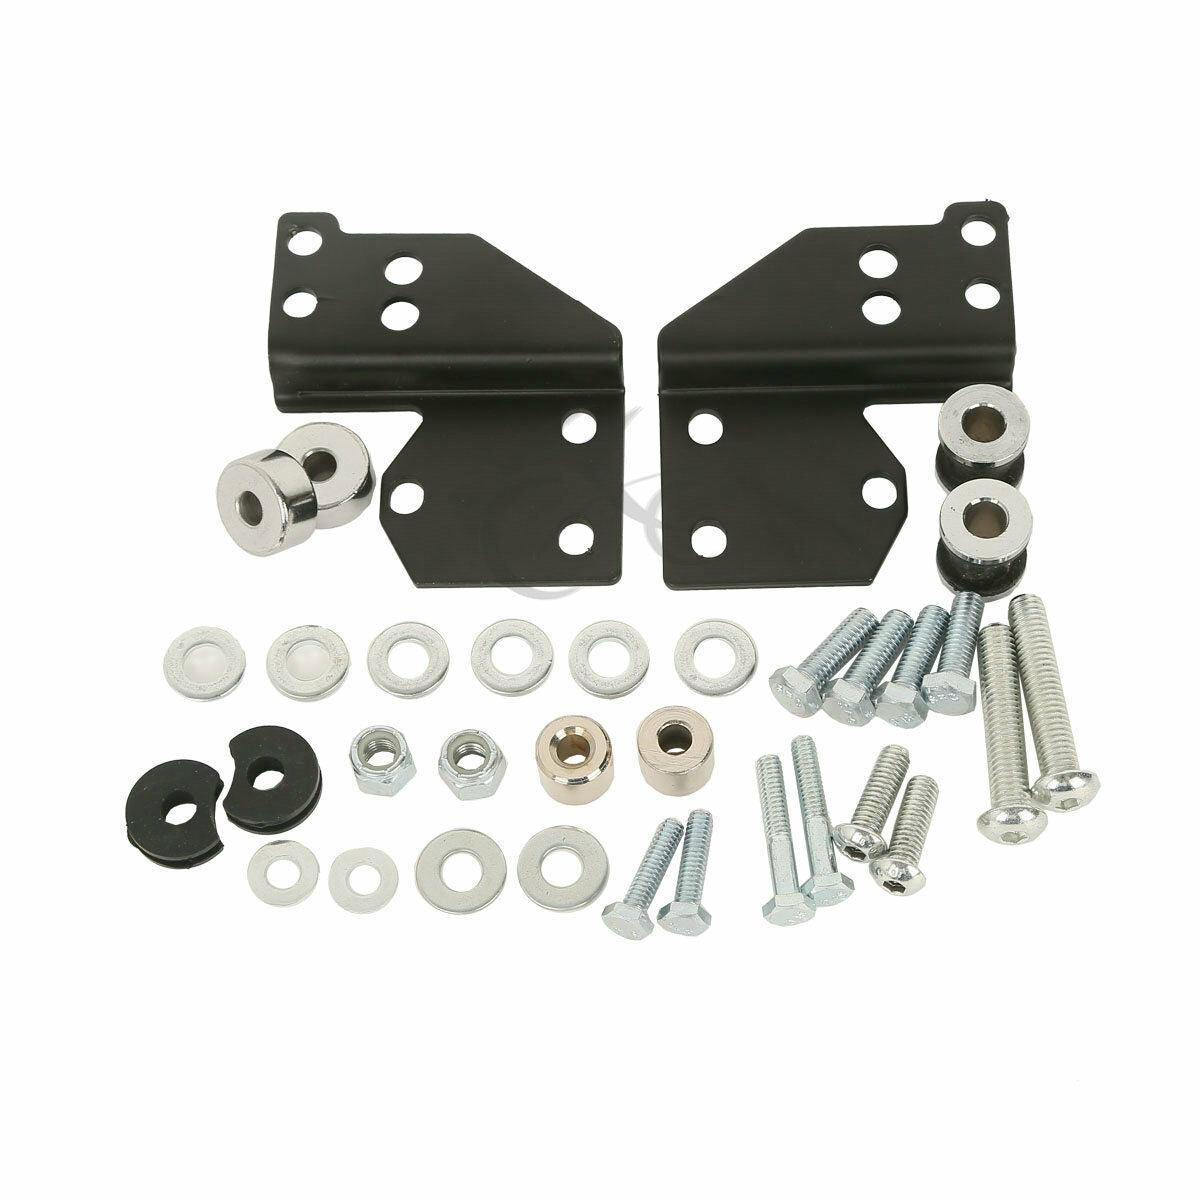 Fit For Harley Road King Electra Glide 97-08 Touring Front Docking Hardware Kit - Moto Life Products